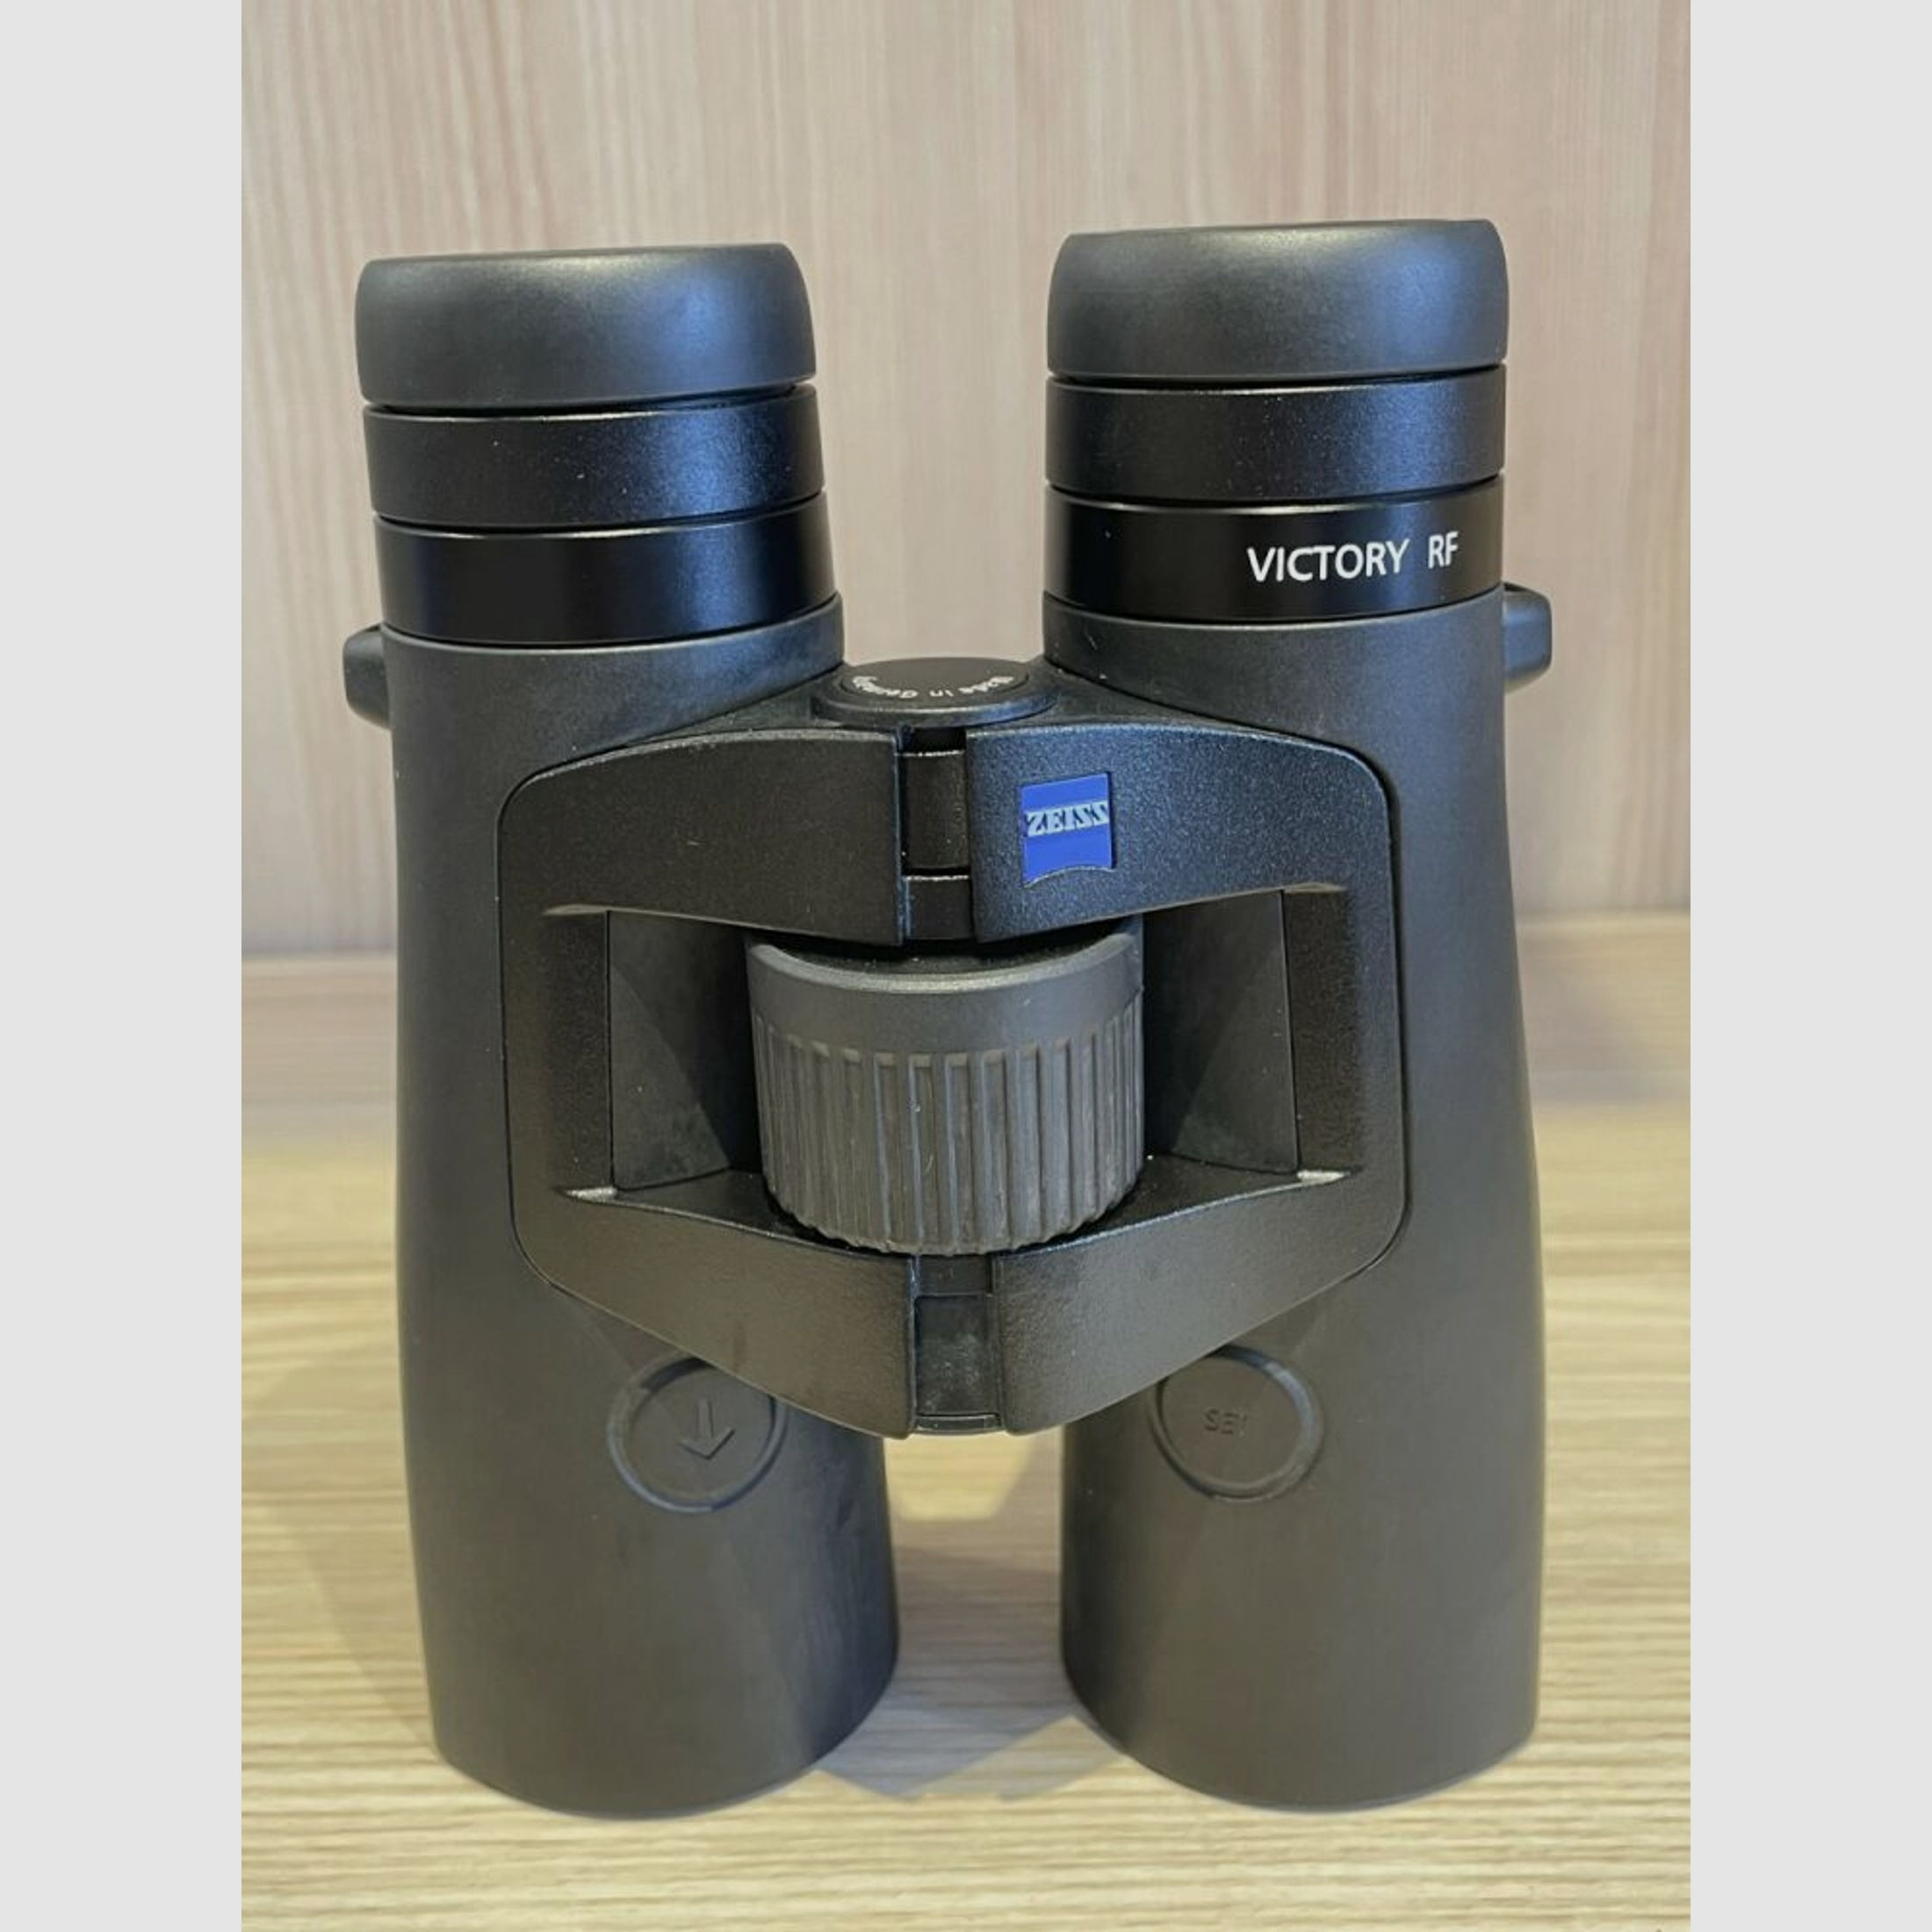 ZEISS	 VICTORY RF 8x42